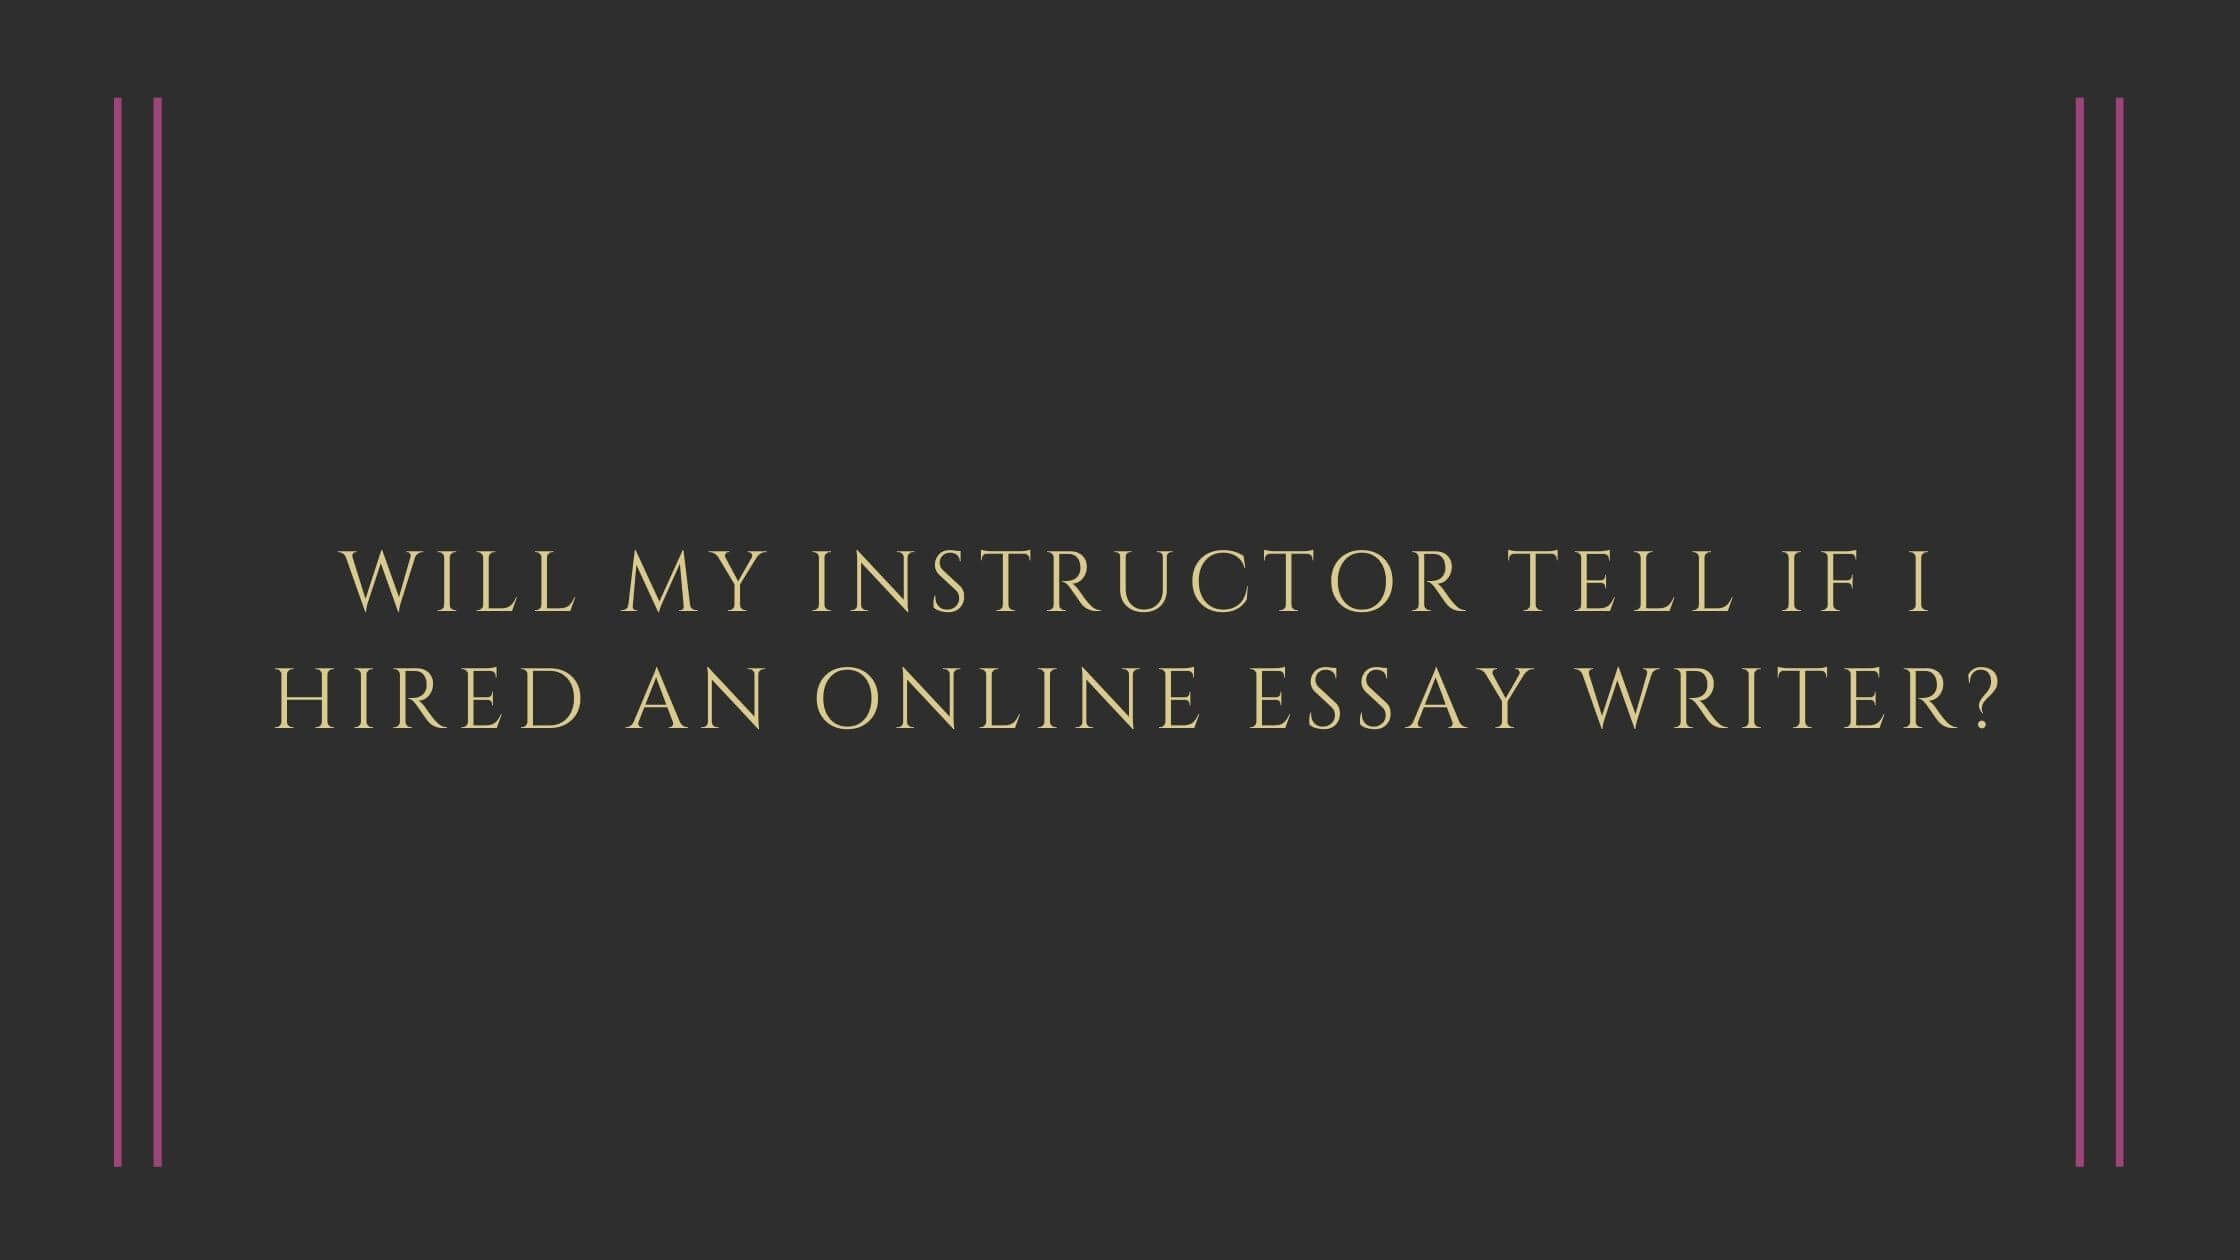 Why should you hire an essay writer, hire essay writer, will my instructor tell if i hired an essay writer